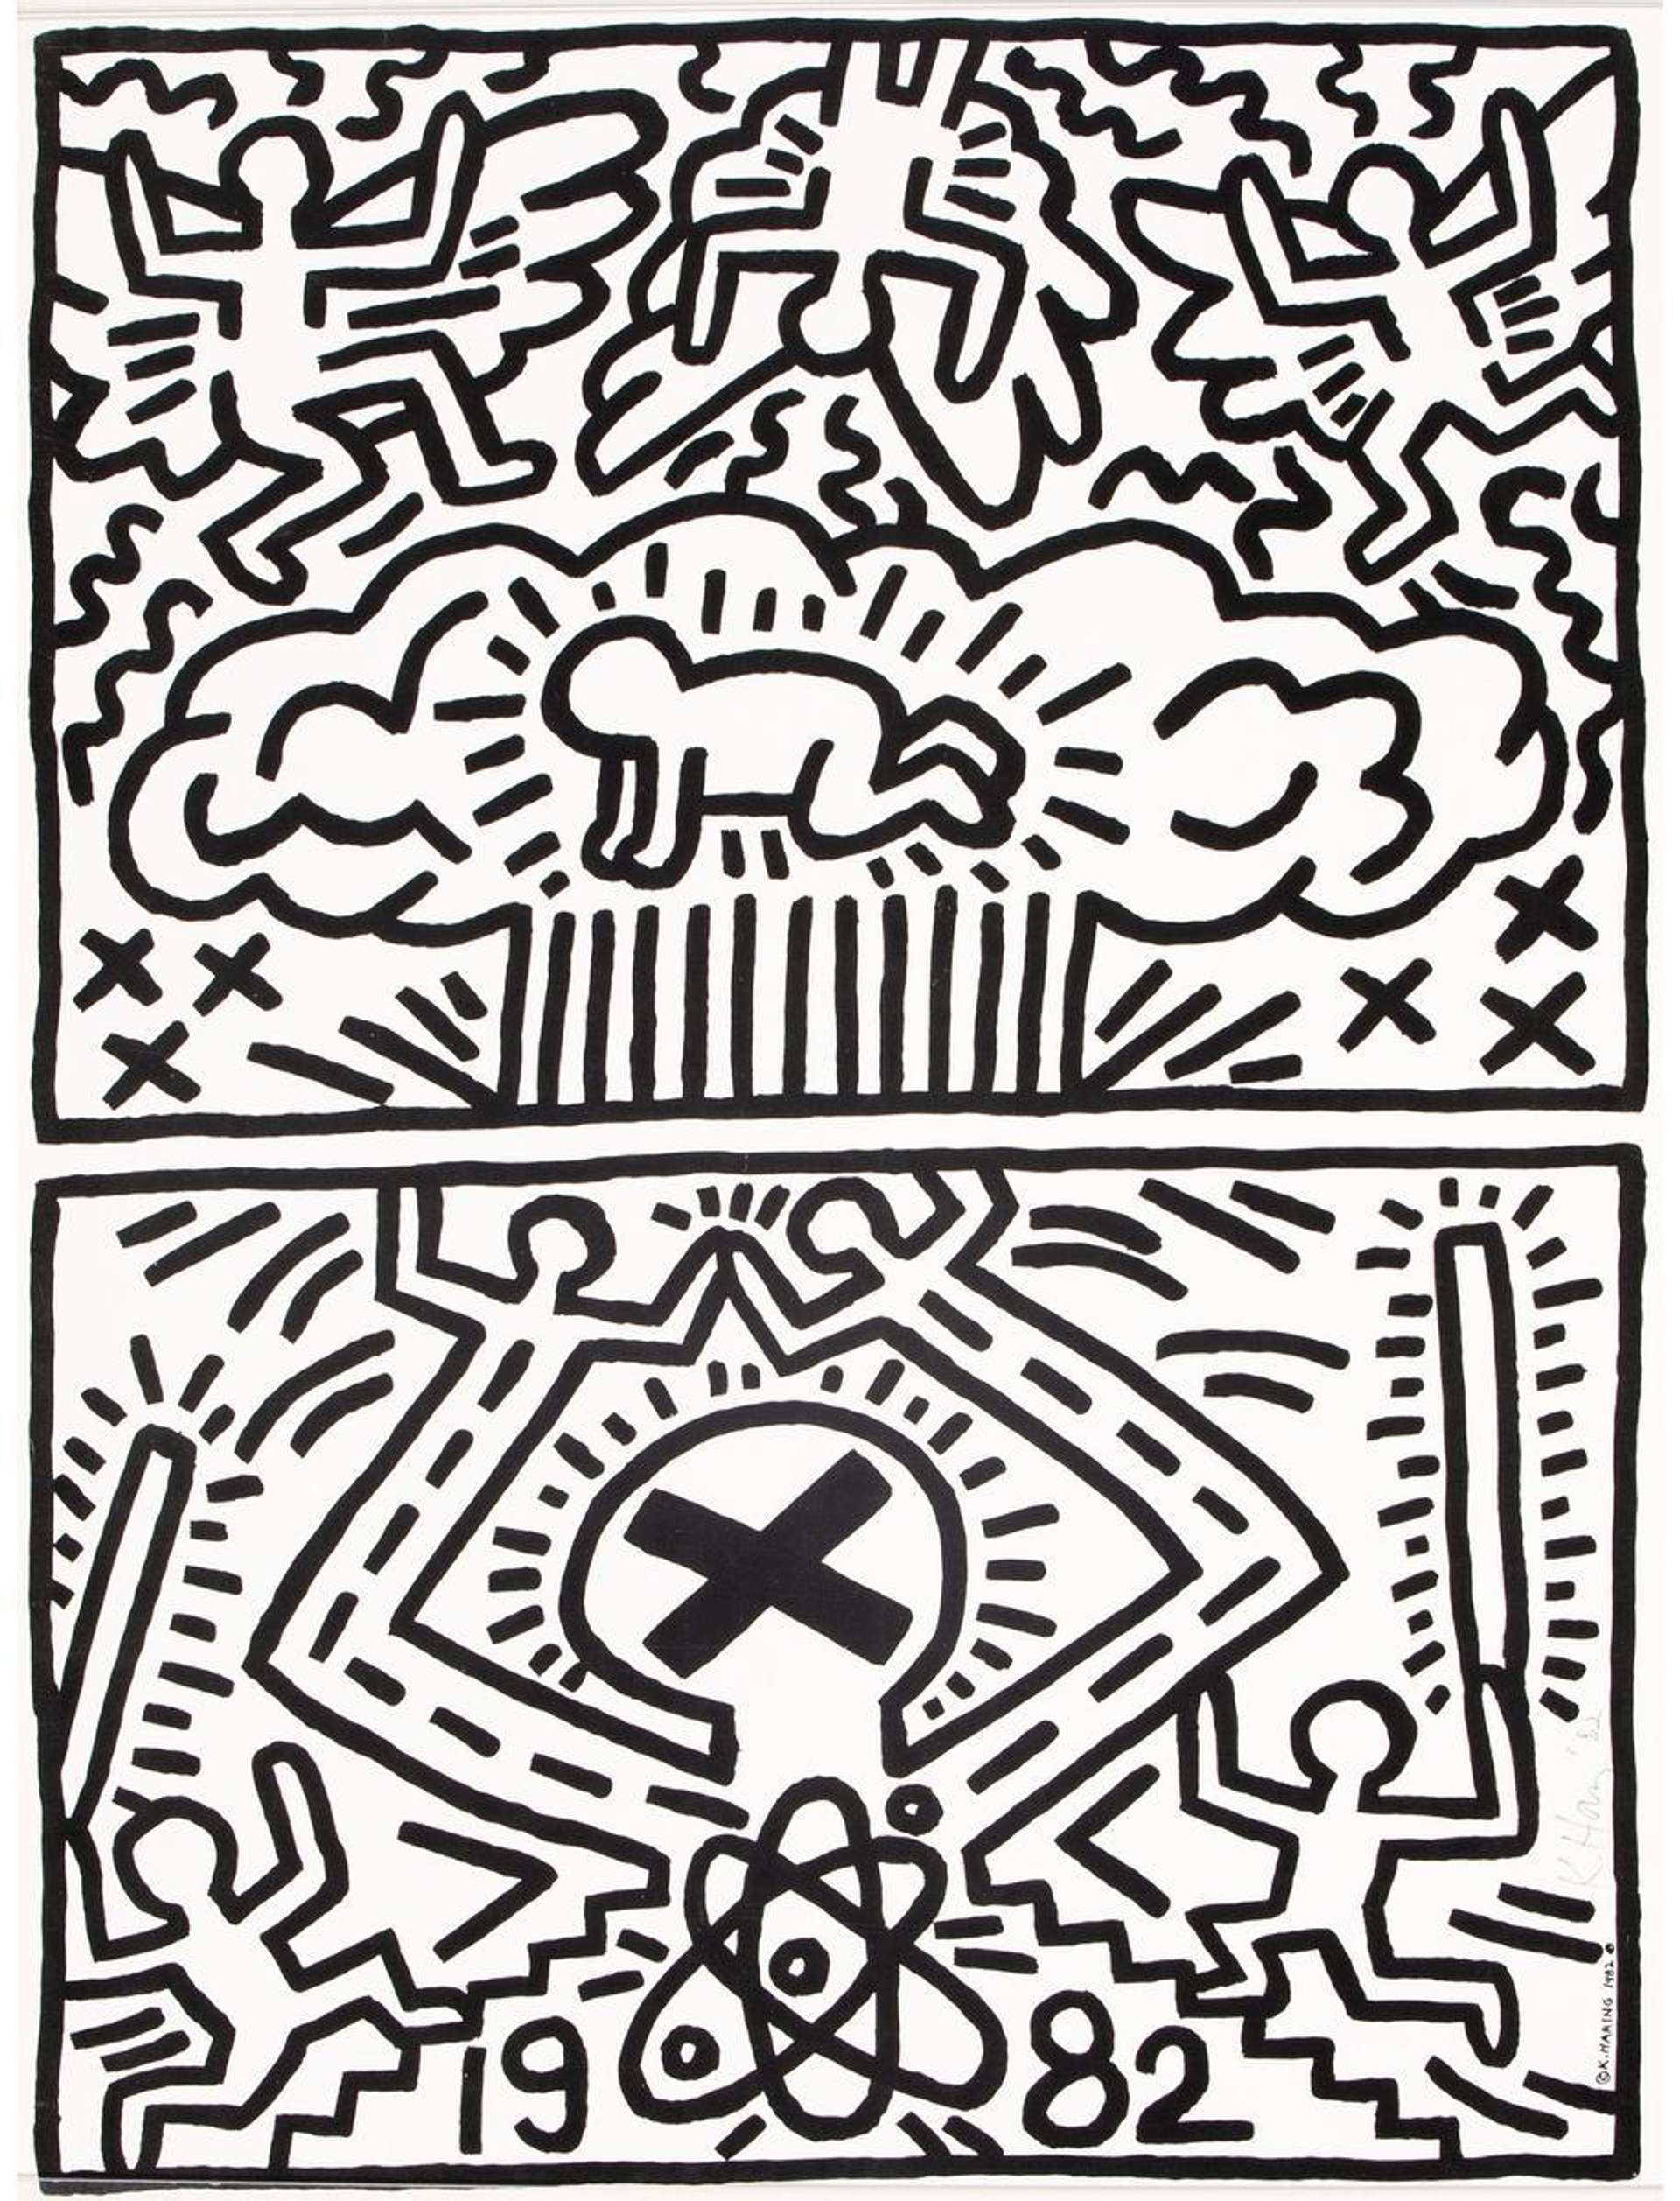 Poster For Nuclear Disarmament - Signed Print by Keith Haring 1982 - MyArtBroker